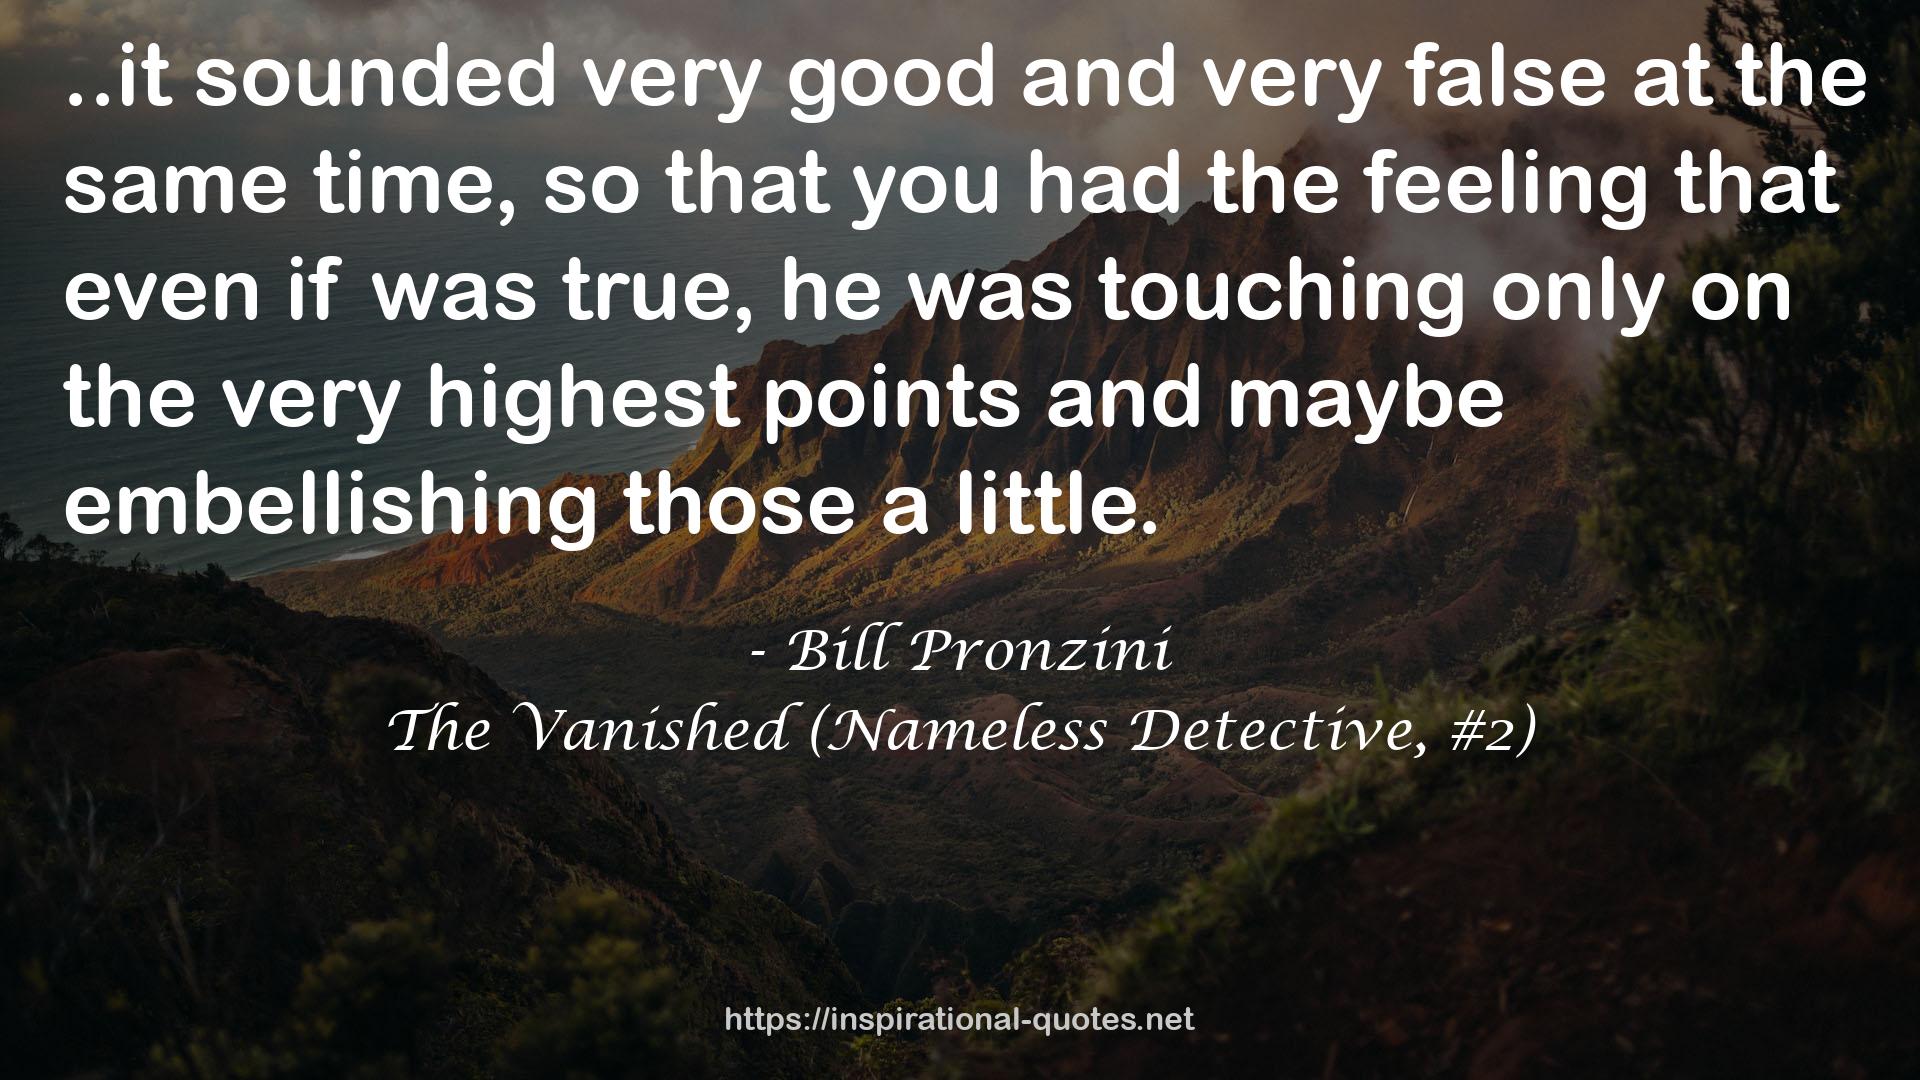 The Vanished (Nameless Detective, #2) QUOTES